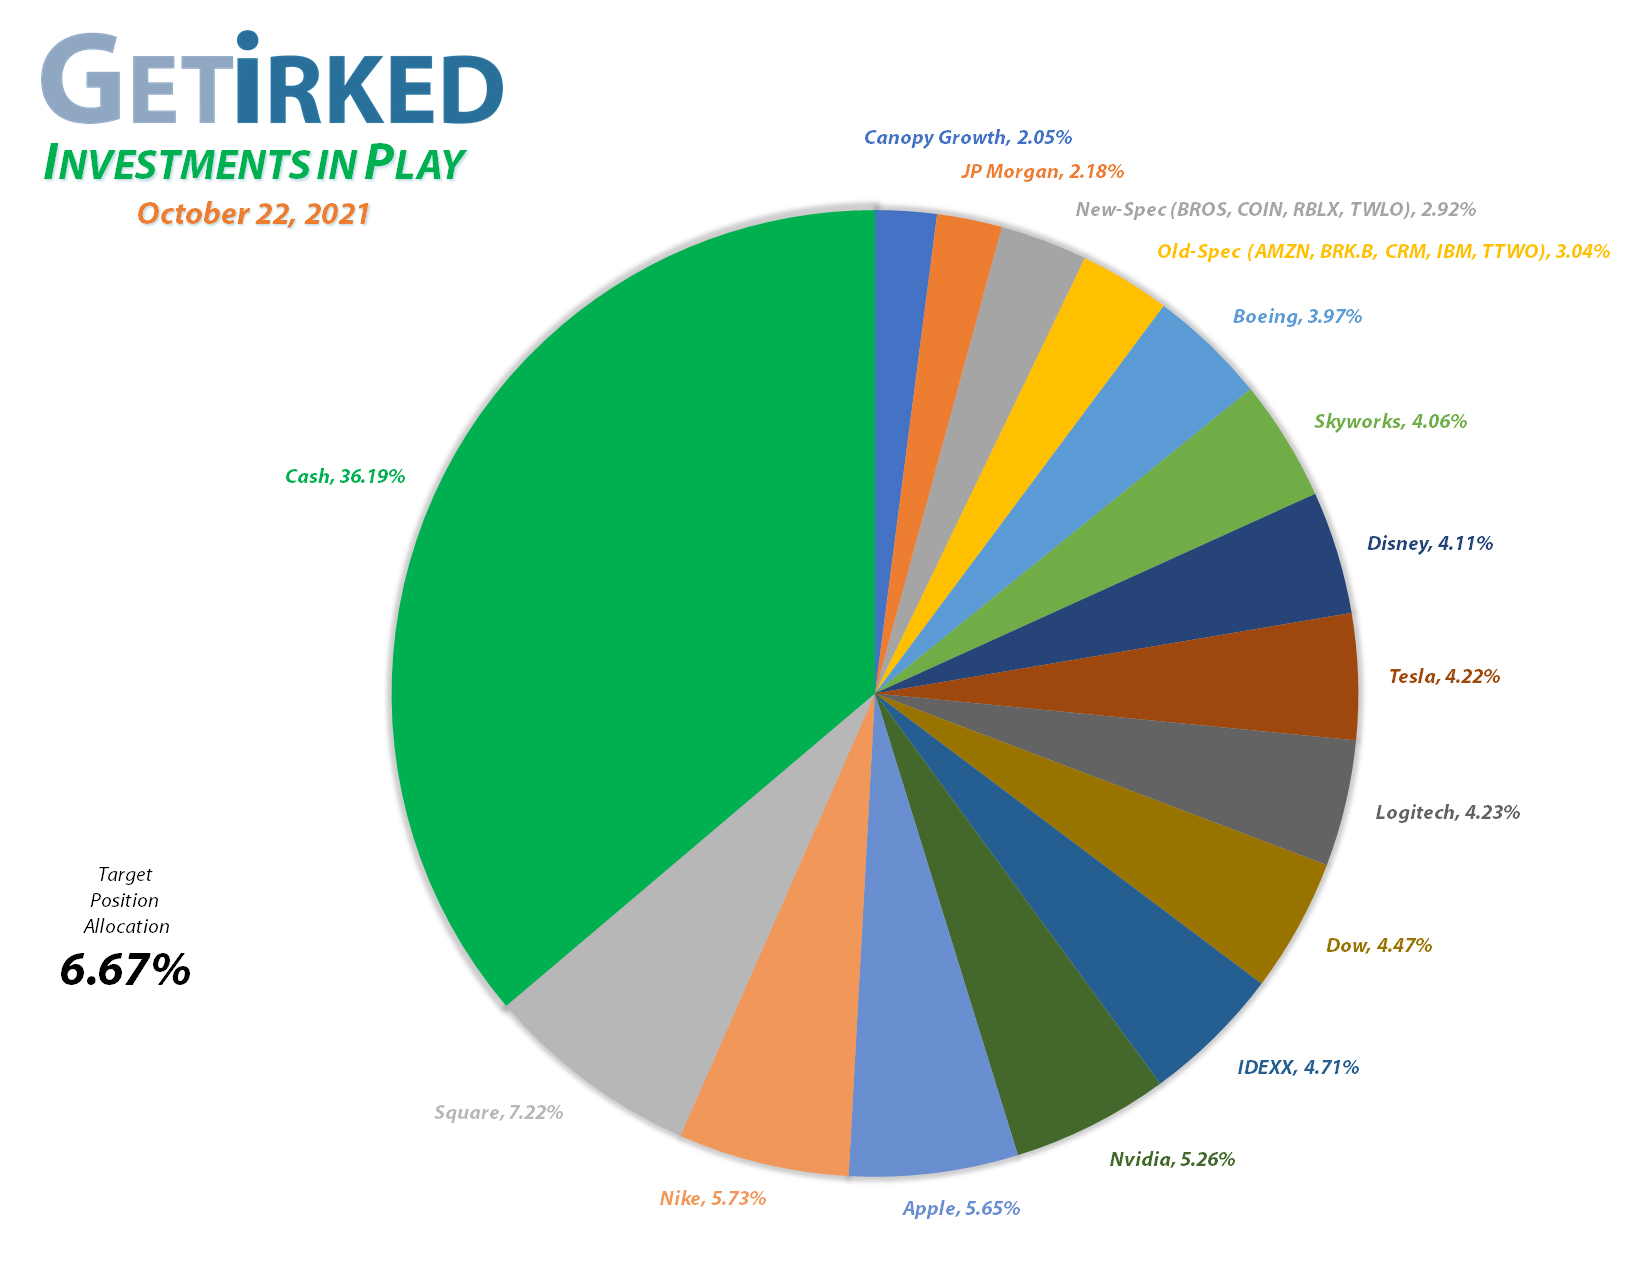 Get Irked - Investments in Play - Current Holdings - March 12, 2021et Irked's Pandemic Portfolio Holdings as of October 22, 2021